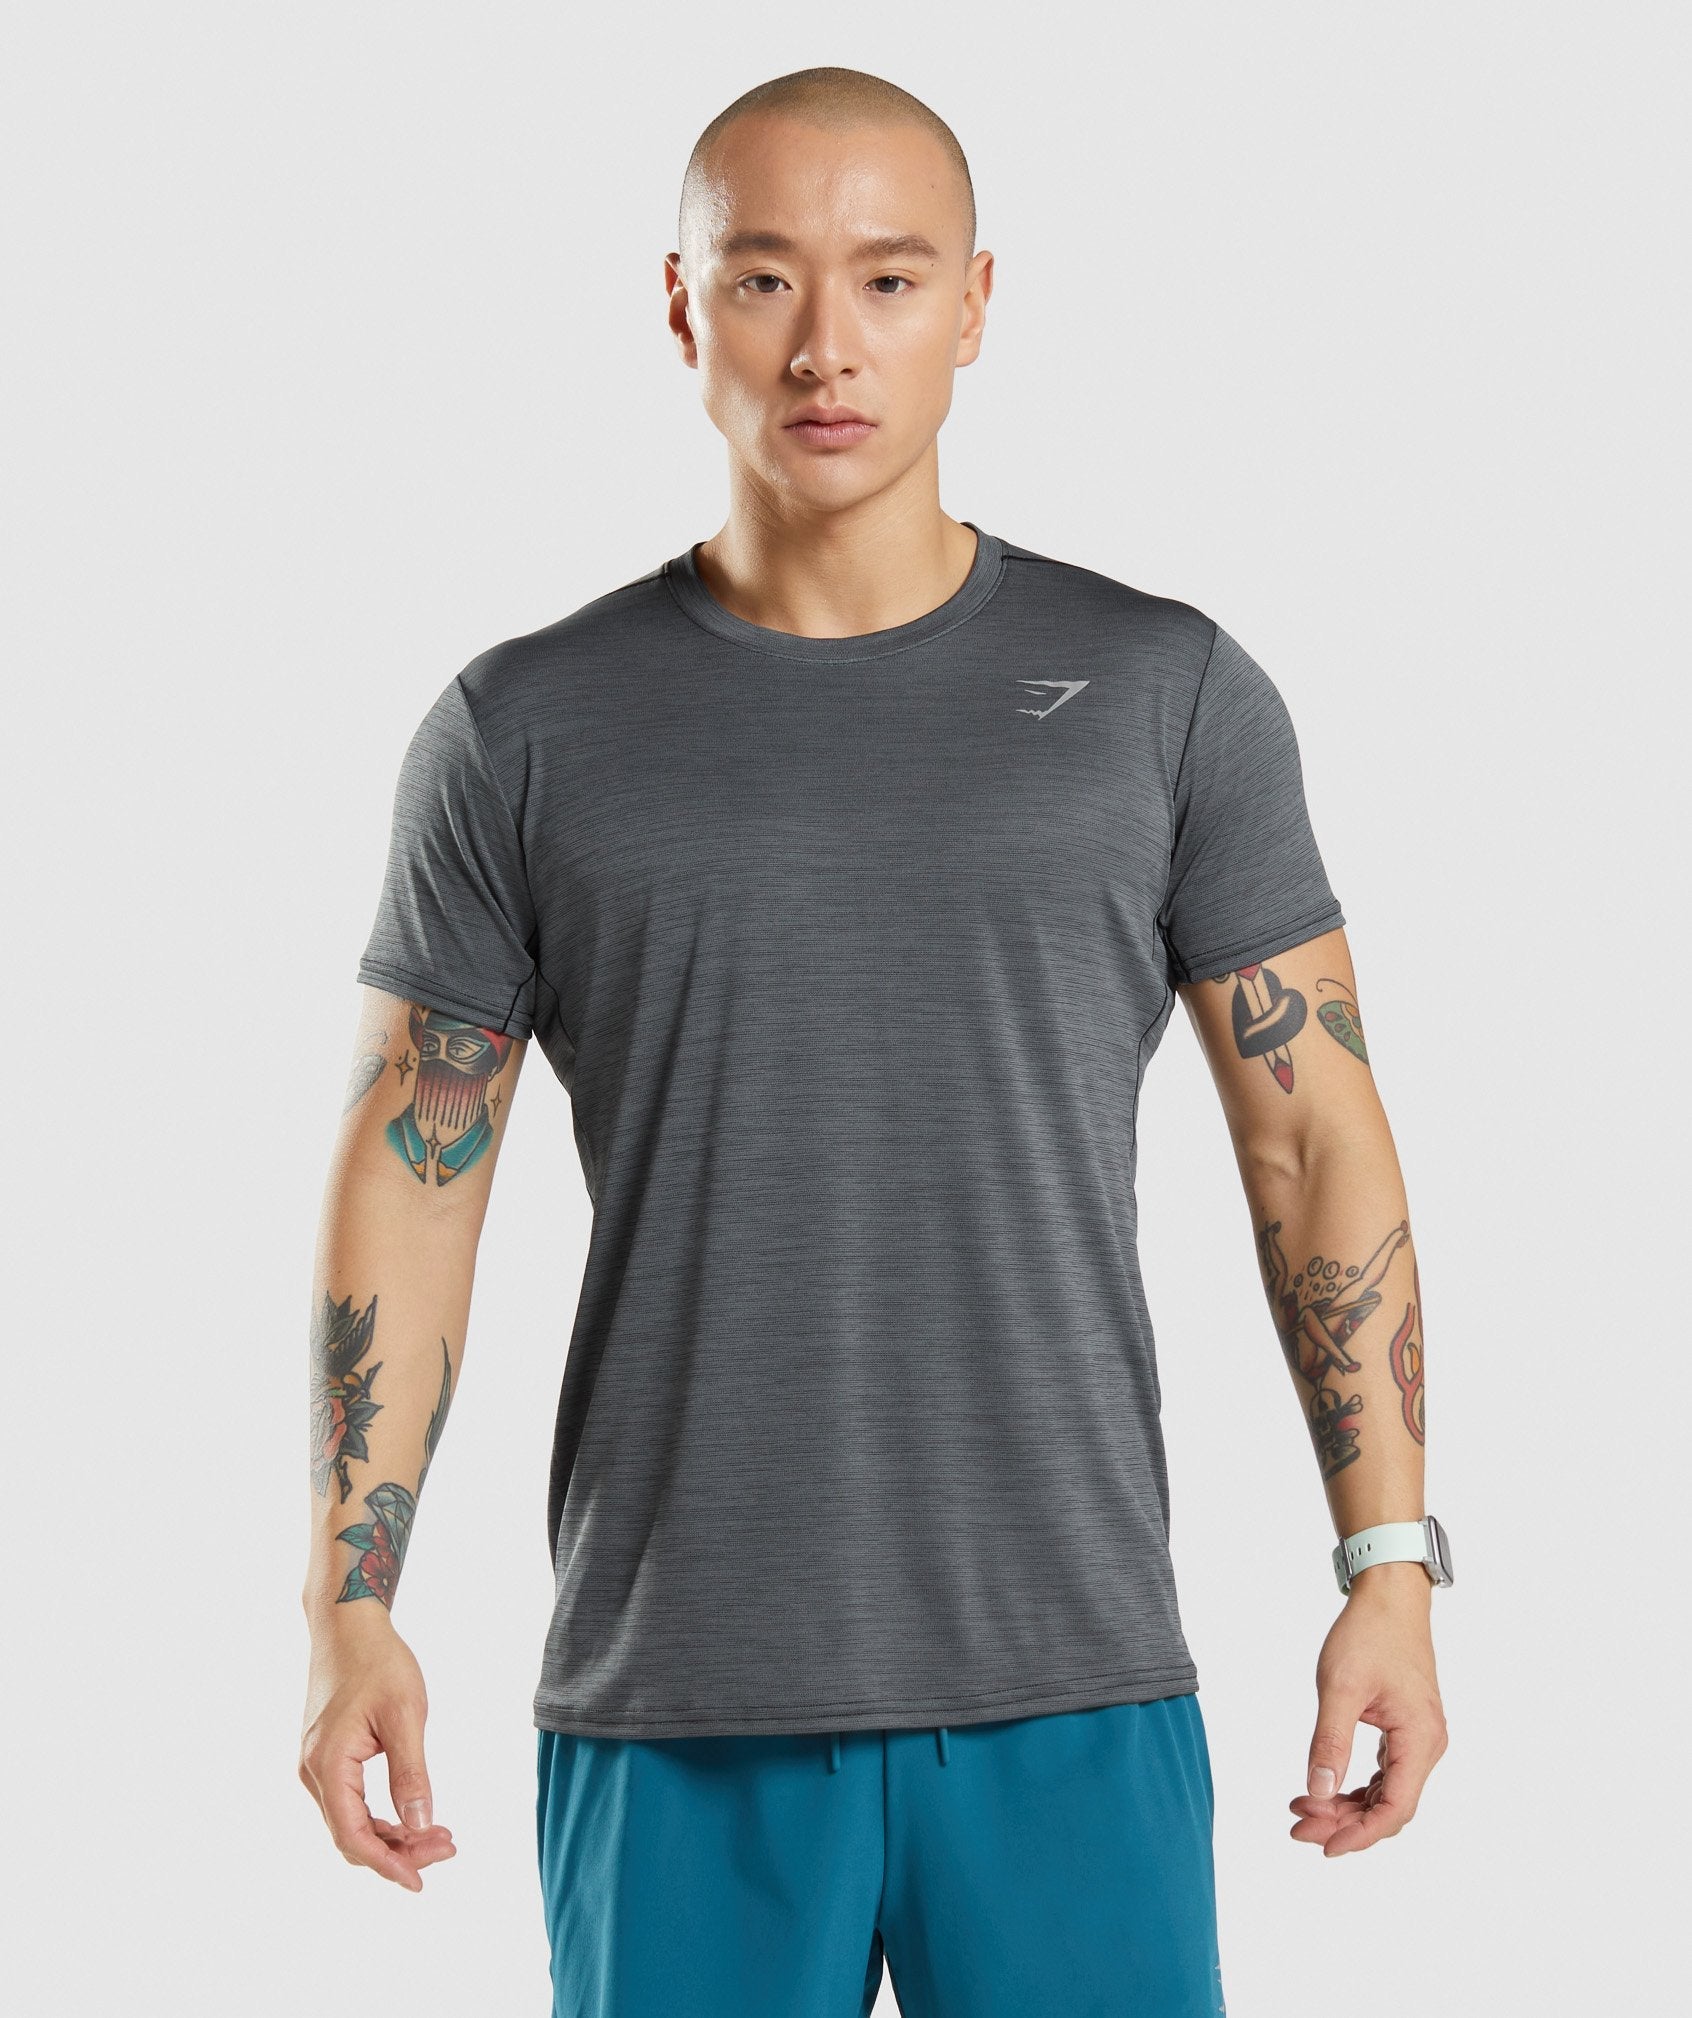 Speed T-Shirt in Black/Charcoal Marl - view 1